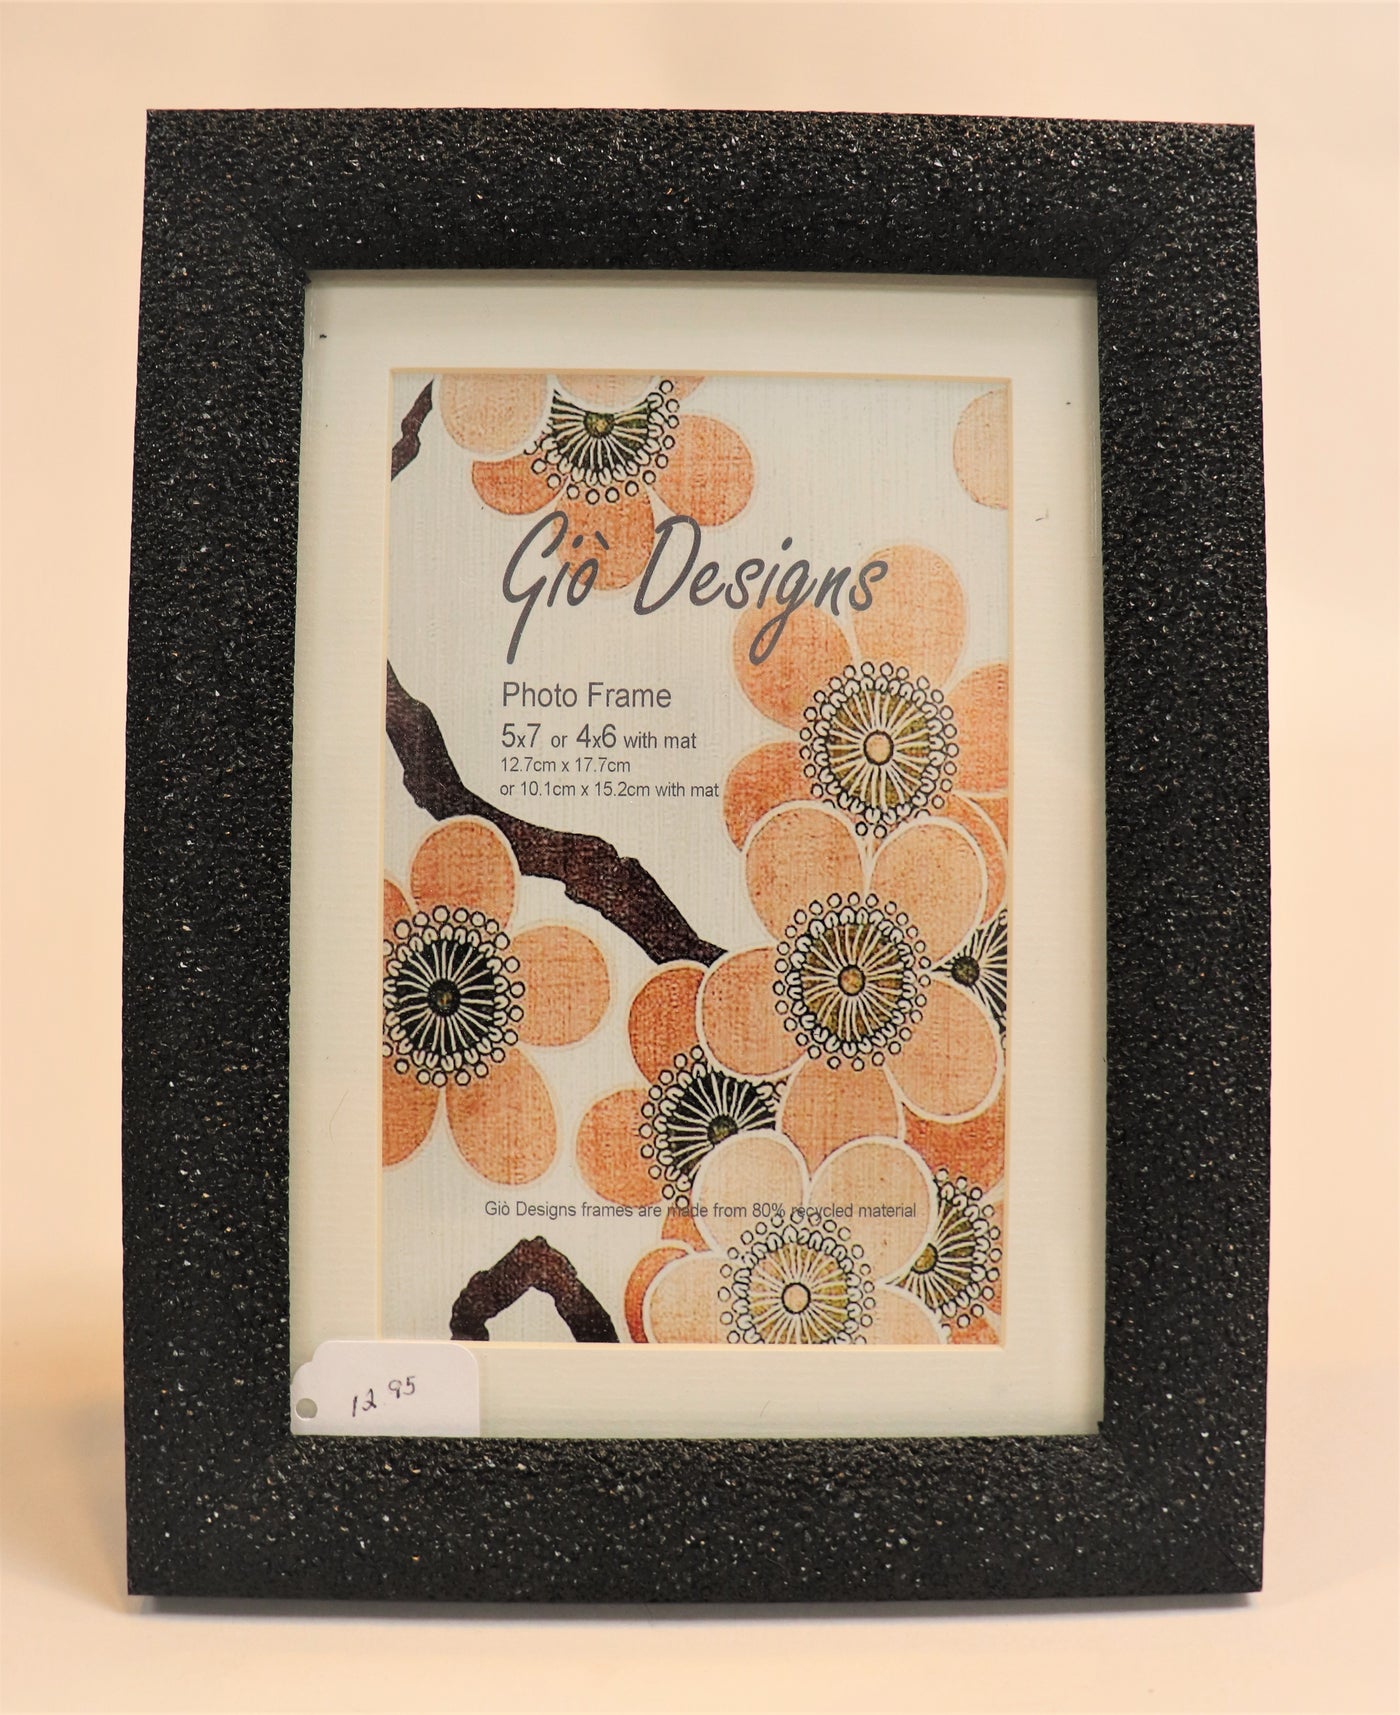 5" x 7" or 4" x 6" with Mat Black Photo Frame-Gio Designs